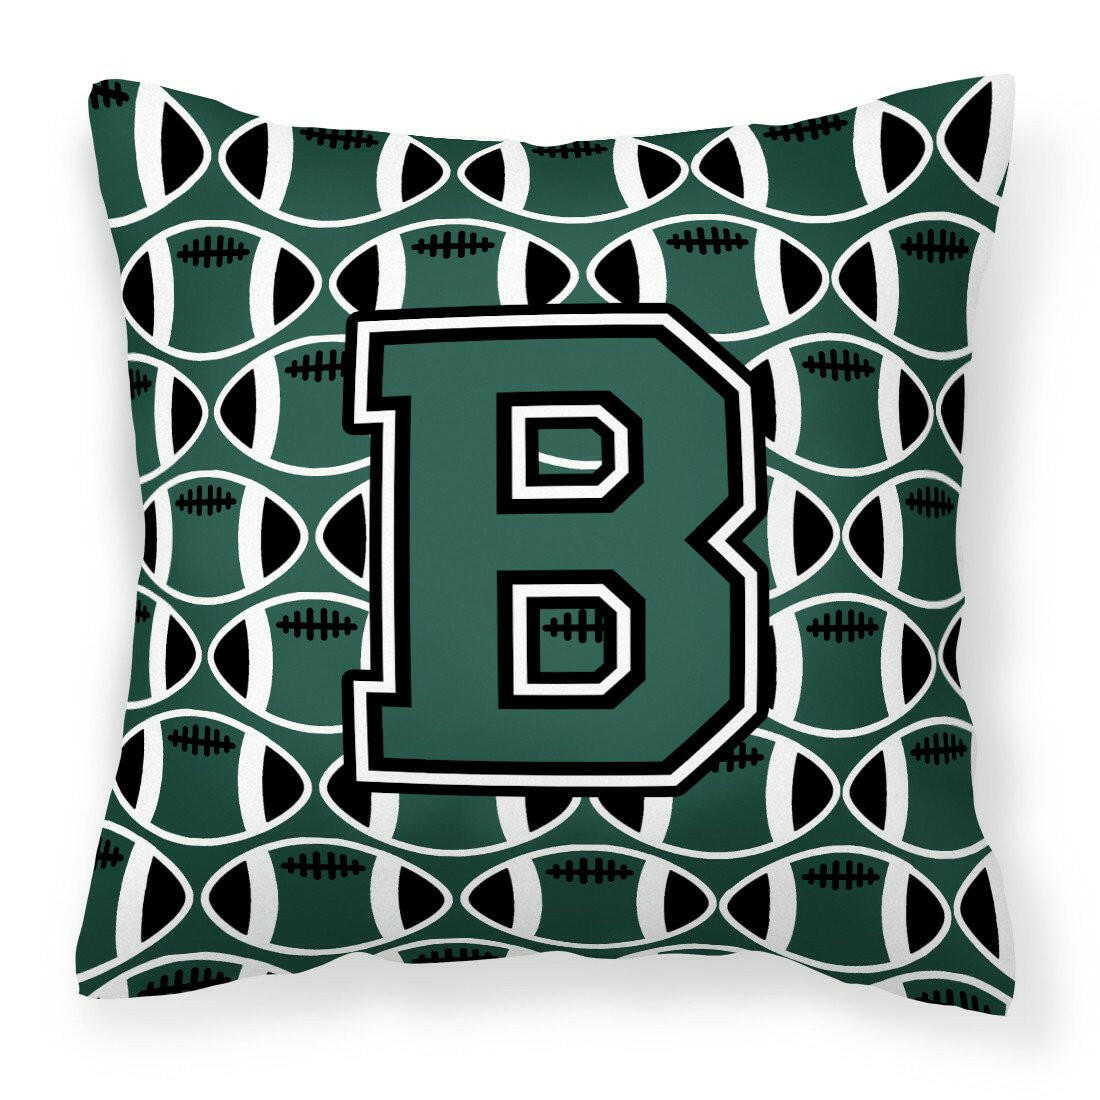 Letter B Football Green and White Fabric Decorative Pillow CJ1071-BPW1414 by Caroline's Treasures